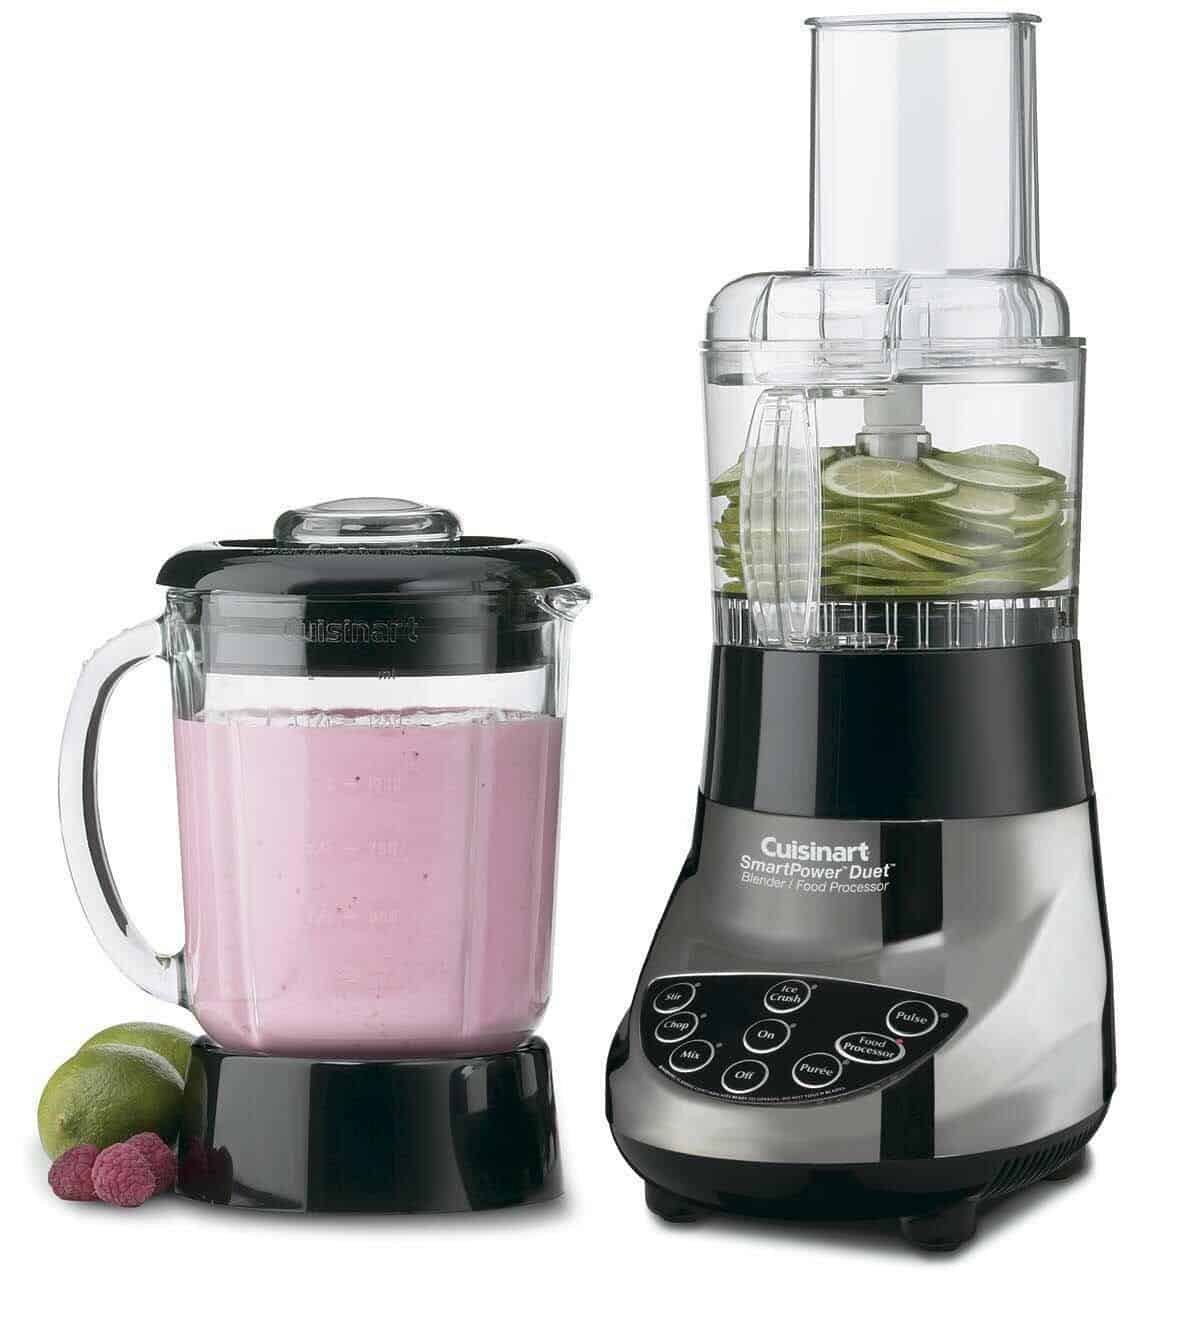 How To Use A Blender Instead Of A Food Processor? - Hero Kitchen